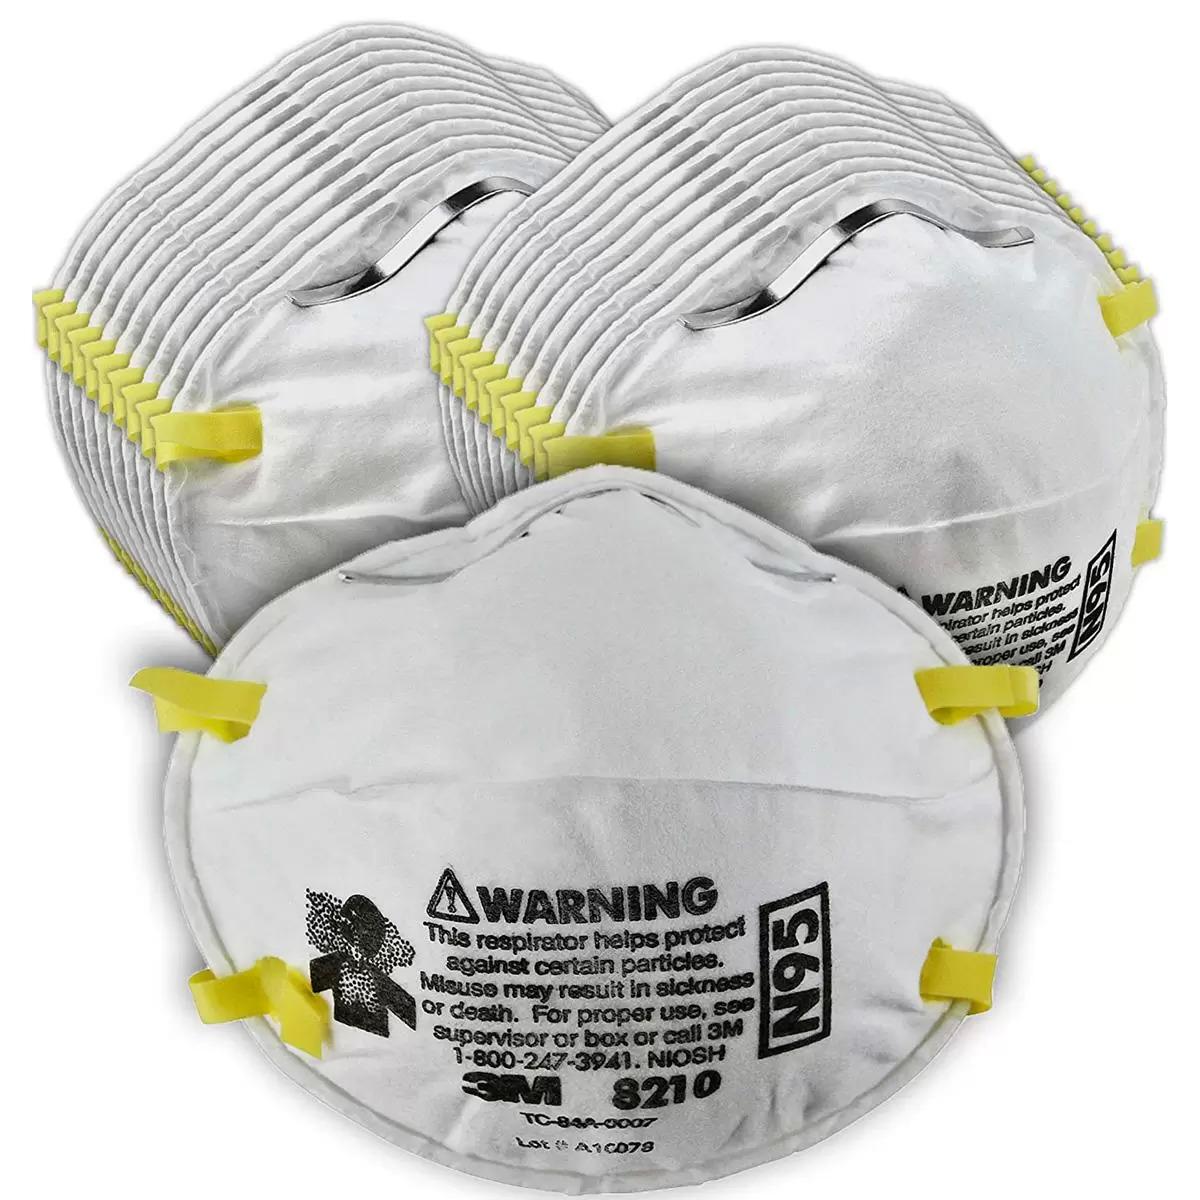 3M N95 Personal Protective Equipment Particulate Respirator 20 Pack for $12.38